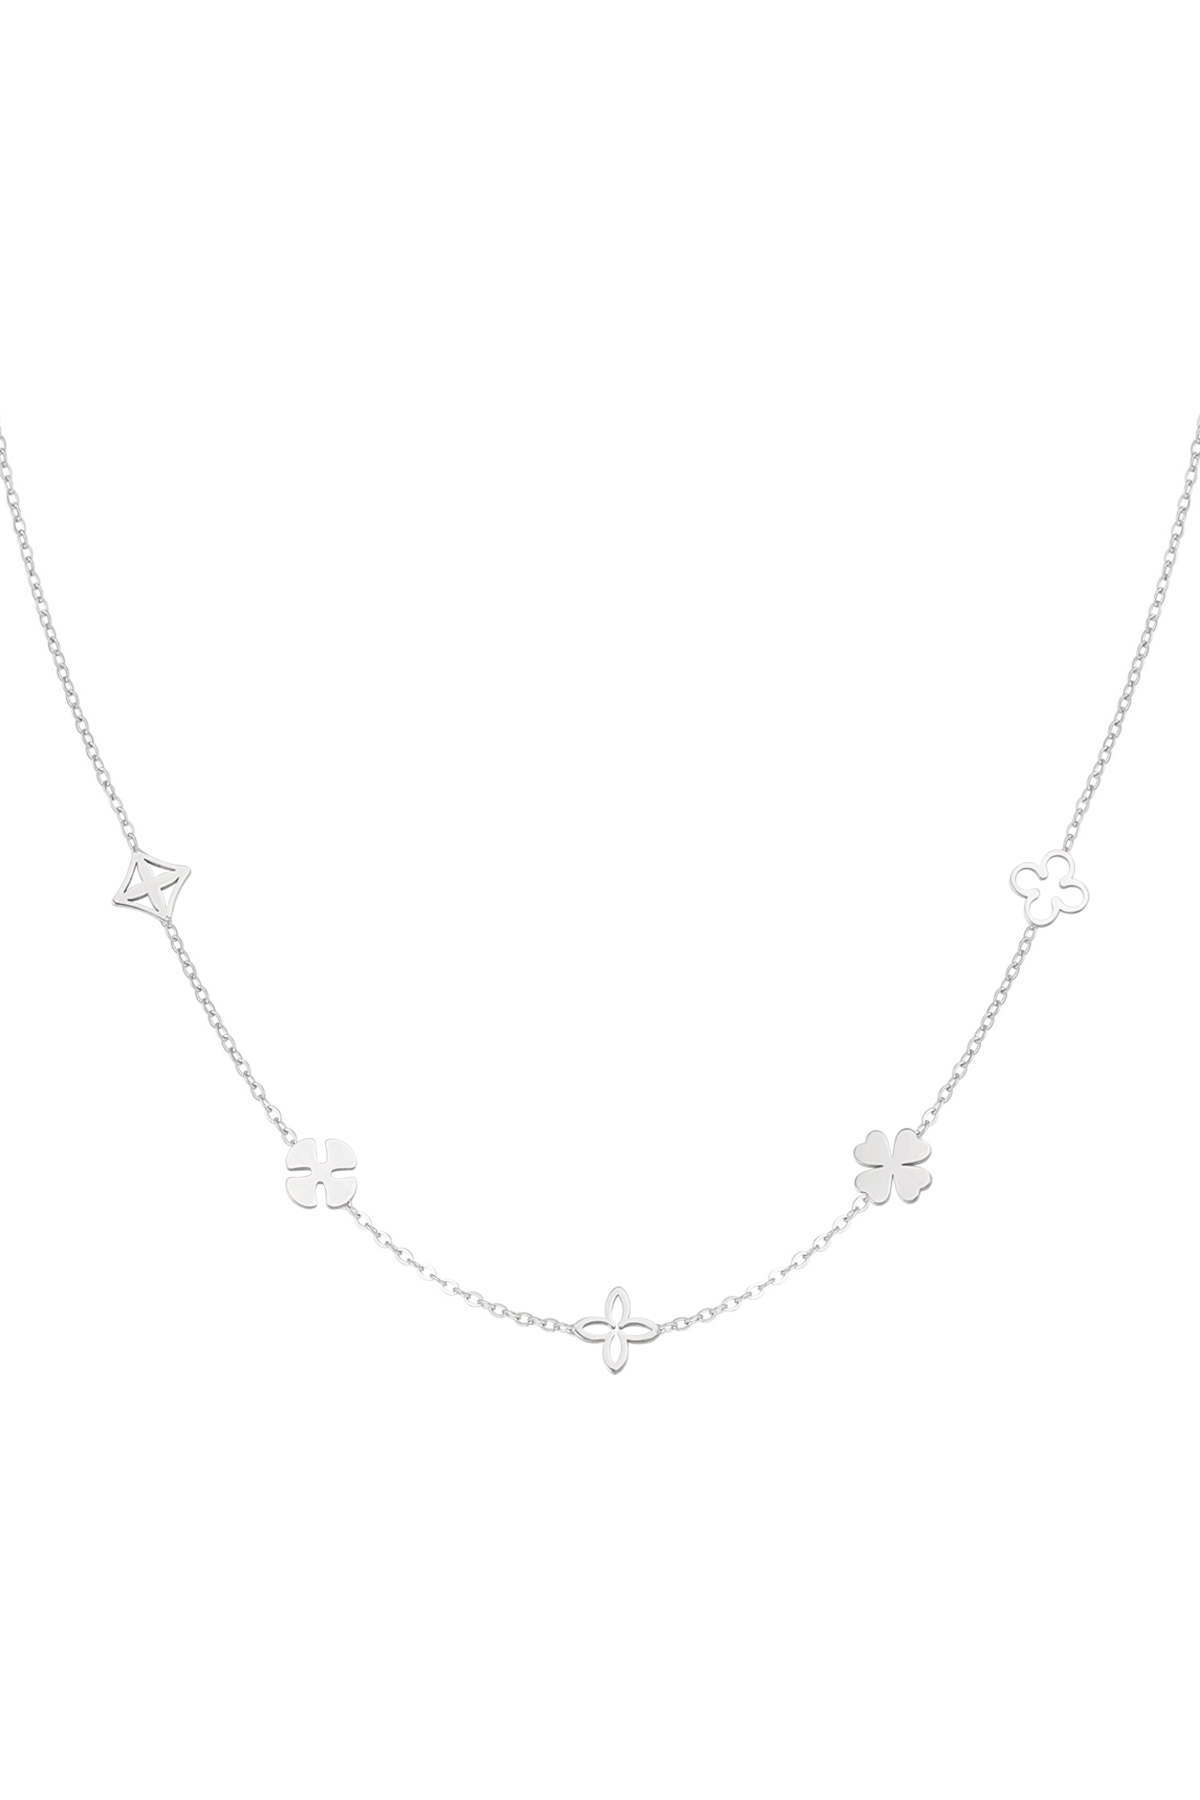 Flower power necklace - silver 